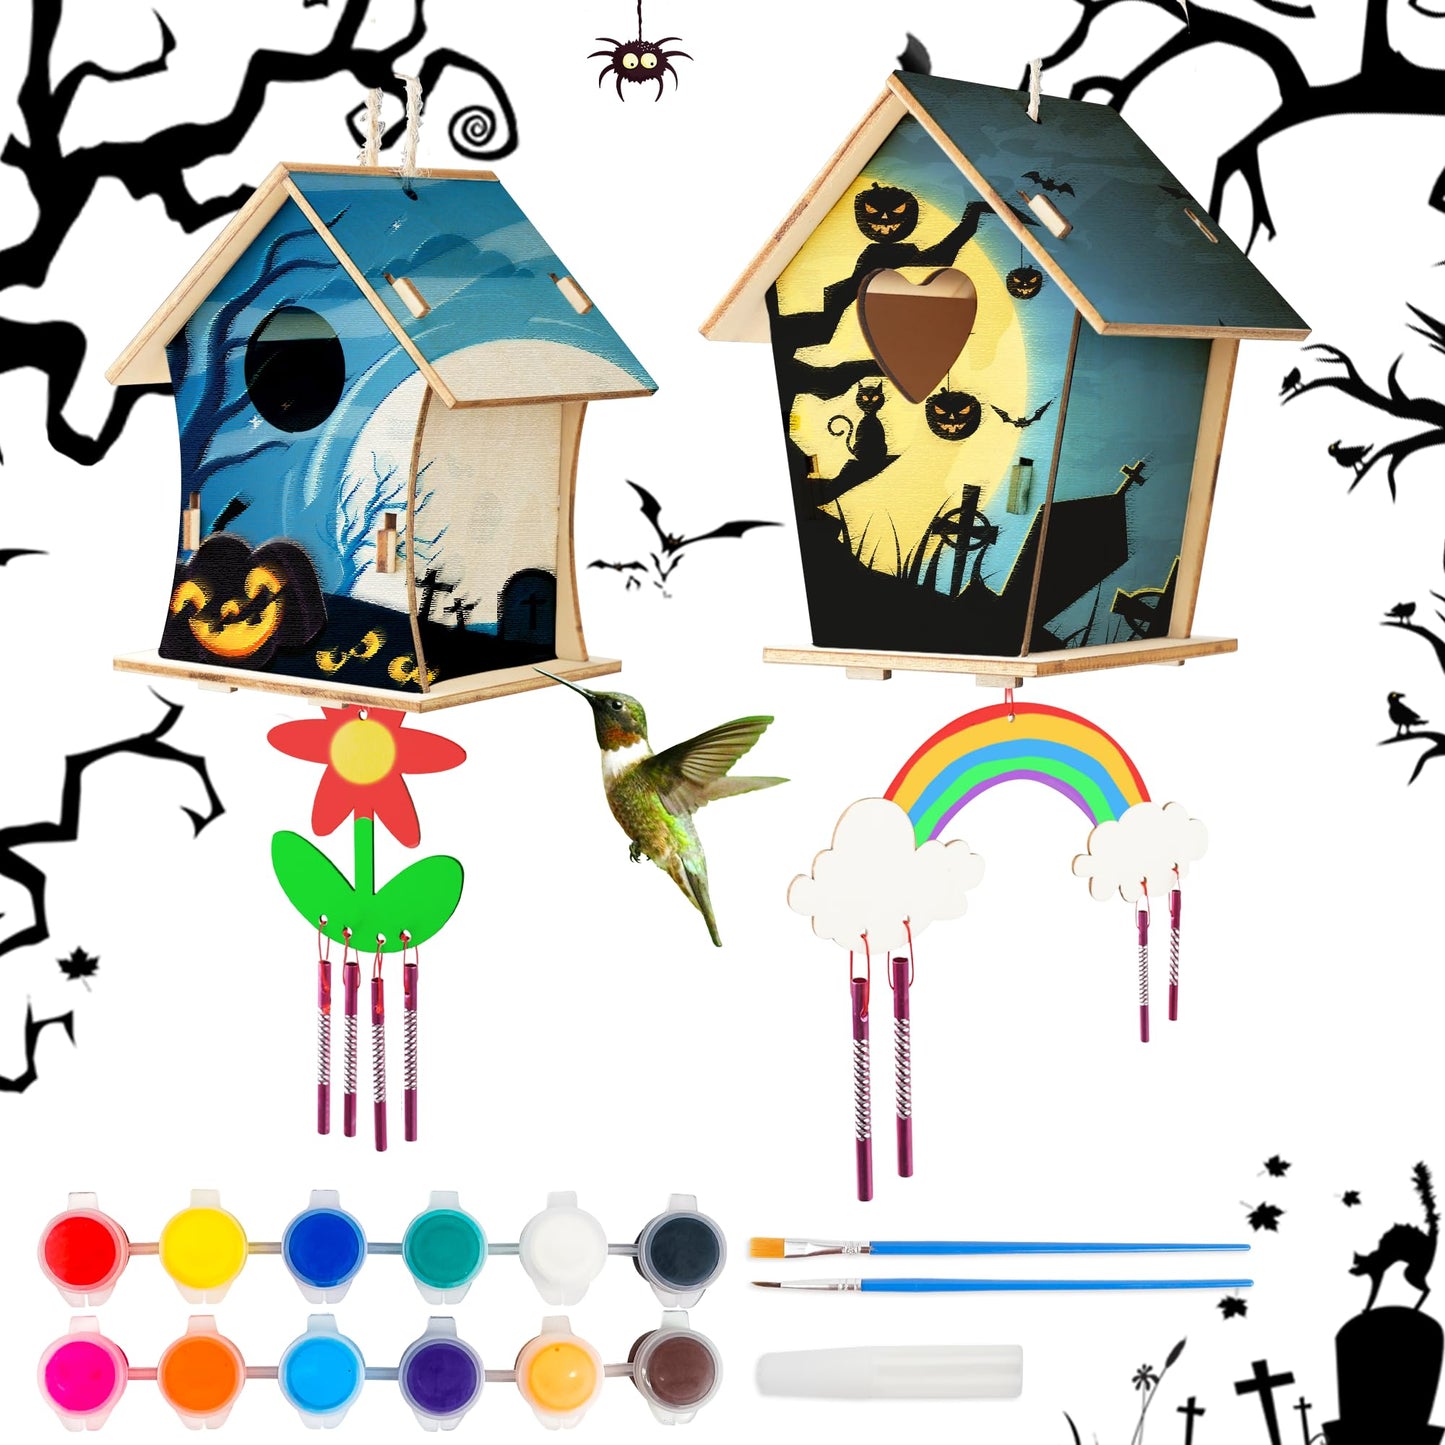 BELLOCHIDDO 2 Pack DIY Birdhouse Wind Chime Kit-Wooden Crafts Arts for Kids to Build and Paint,Craft Kits Includes Paints & Brushes,Halloween Gifts Toys for Girls Boys Toddlers Ages 3-5 4-6 6-8 8-12